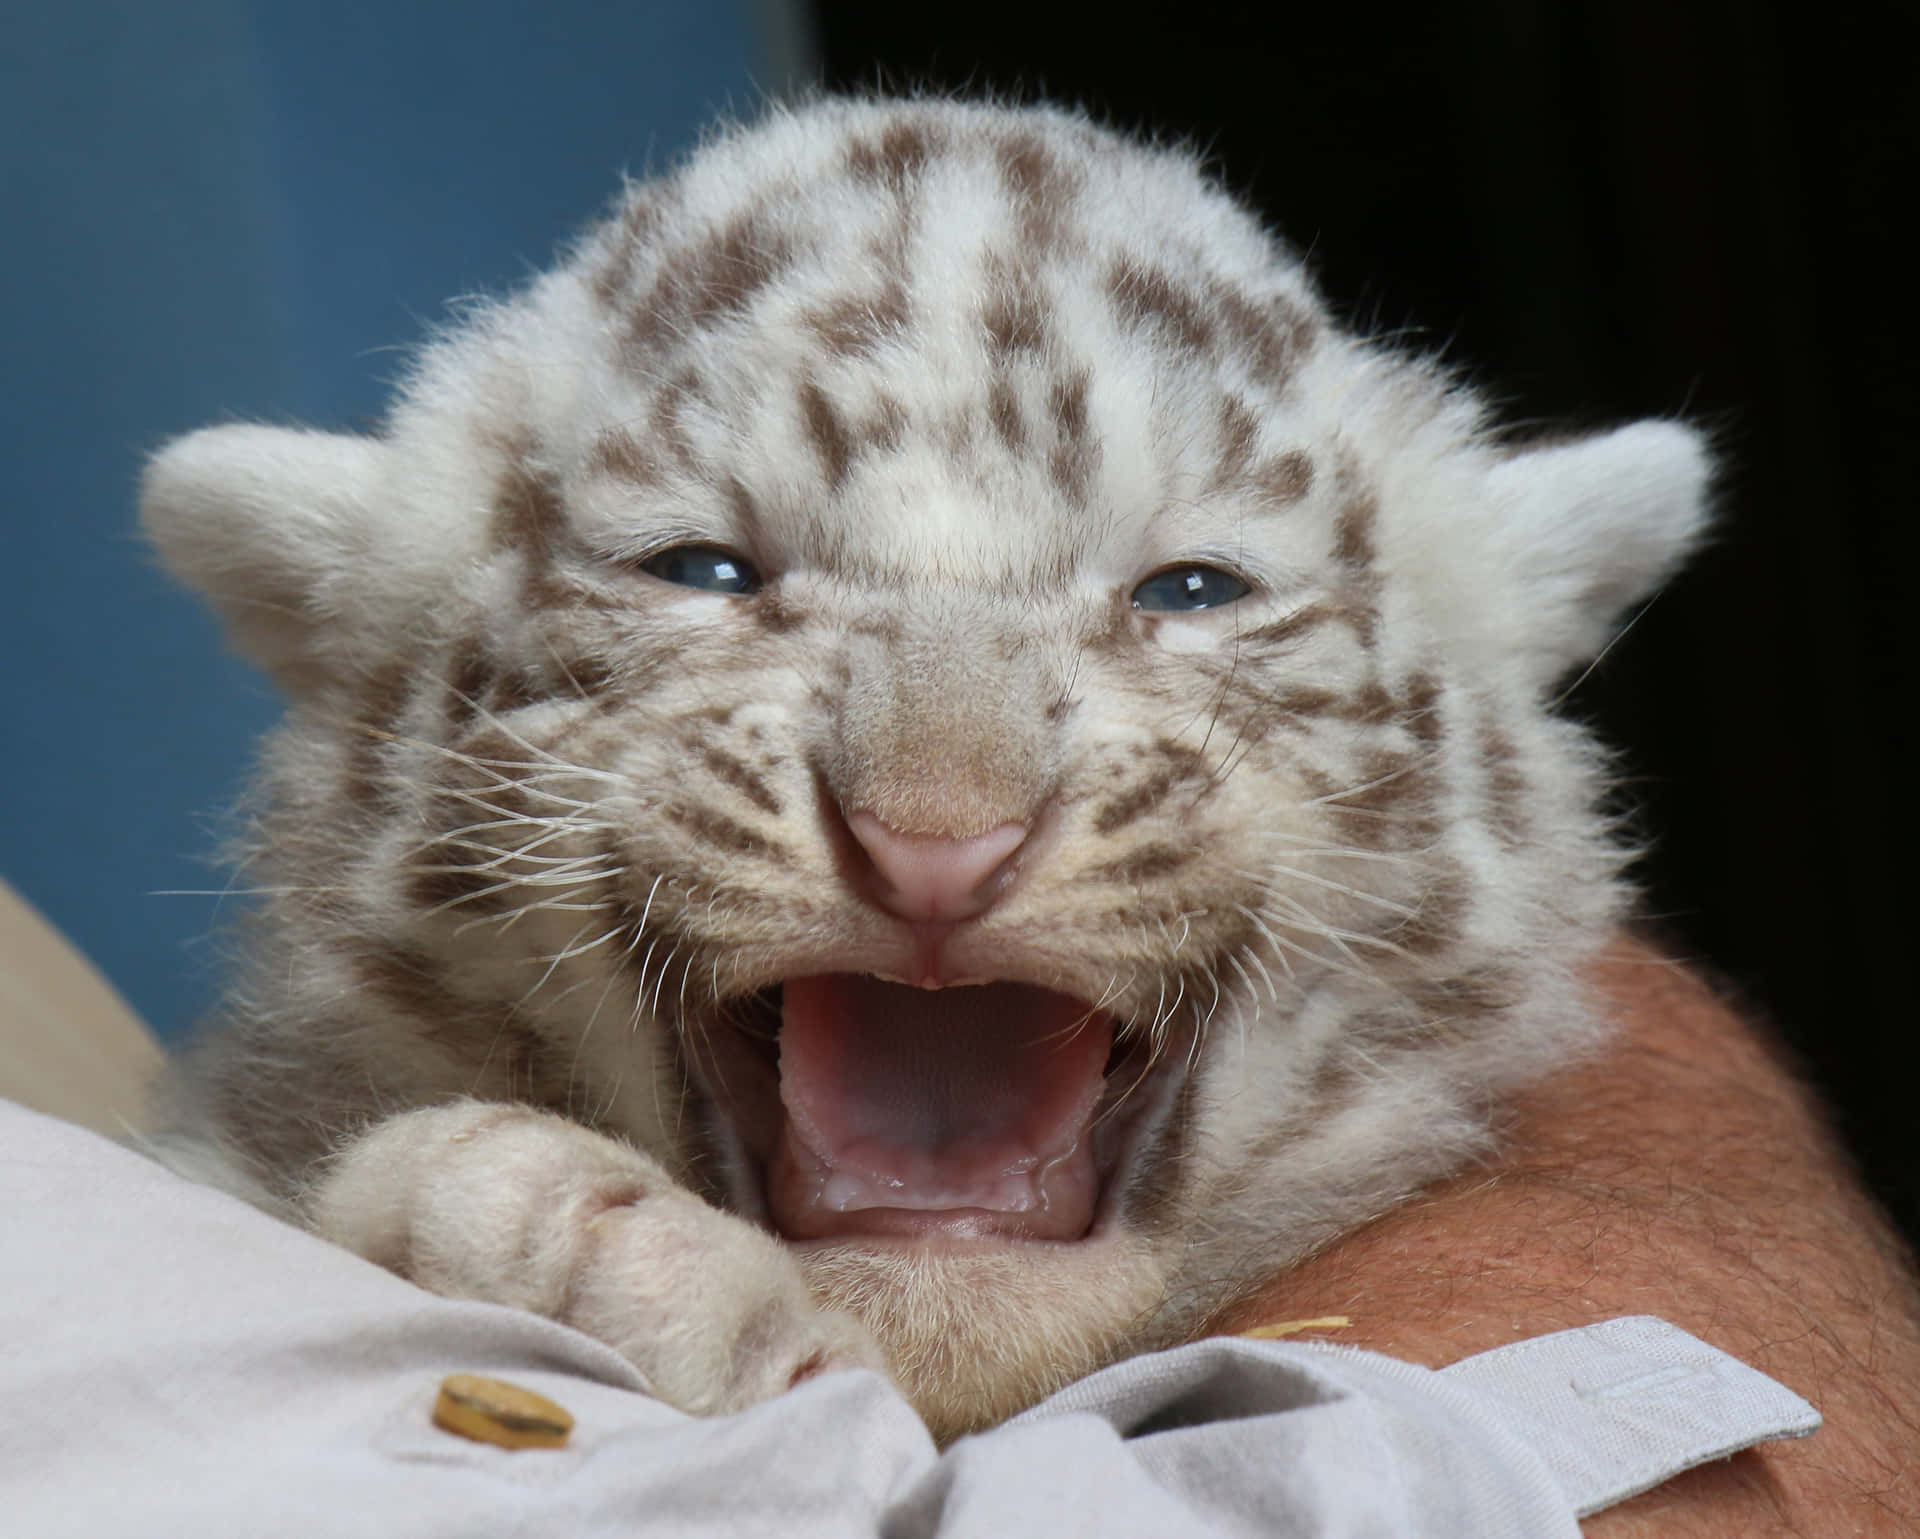 Adorably fierce Baby Tiger smiles widely, giving viewers a glimpse of the wildlife's natural beauty.